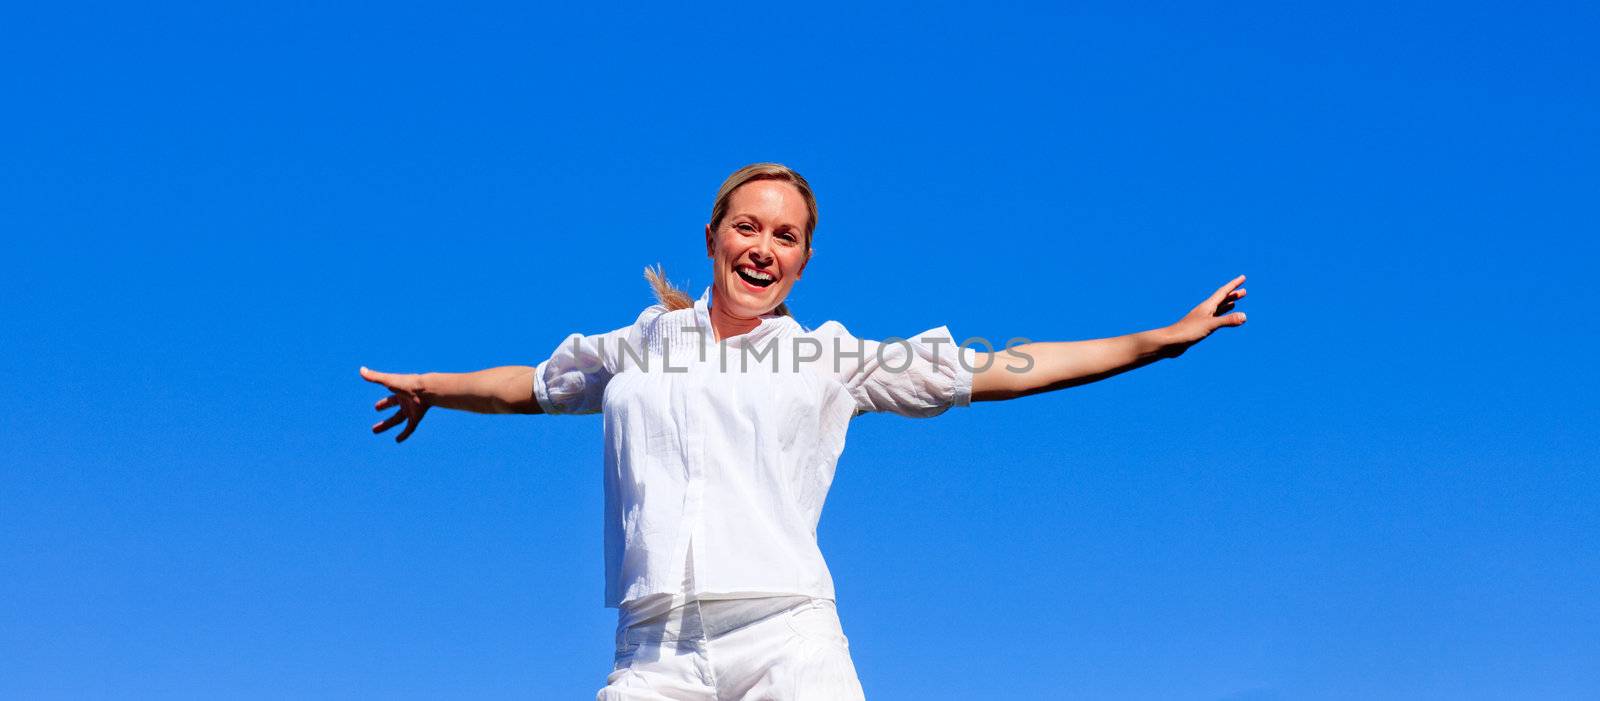 Happy woman jumping outdoors against blue sky